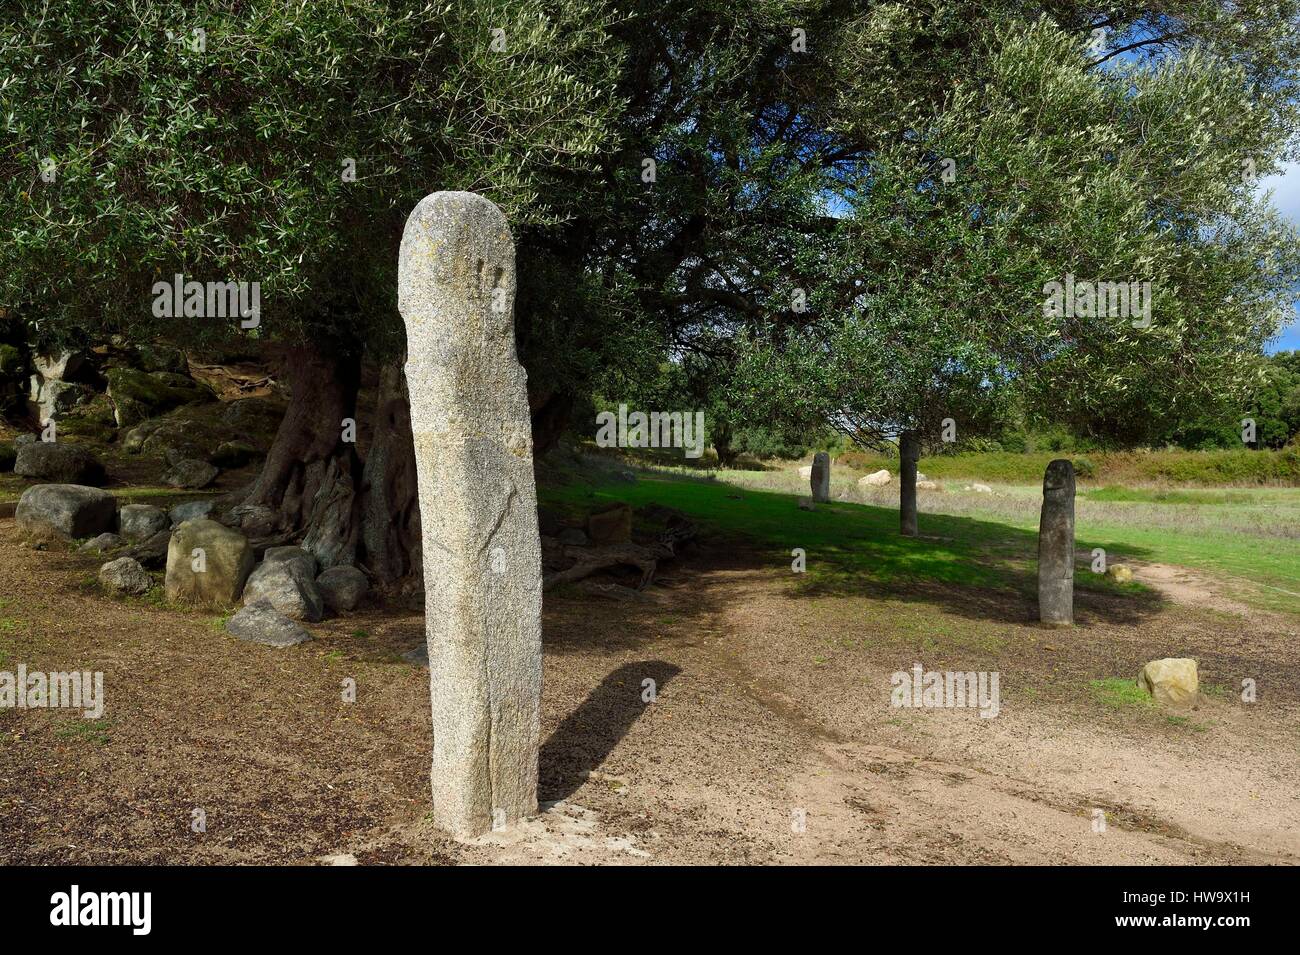 France, Corse du Sud, prehistoric site of Filitosa, menhir statue of armed characters Stock Photo